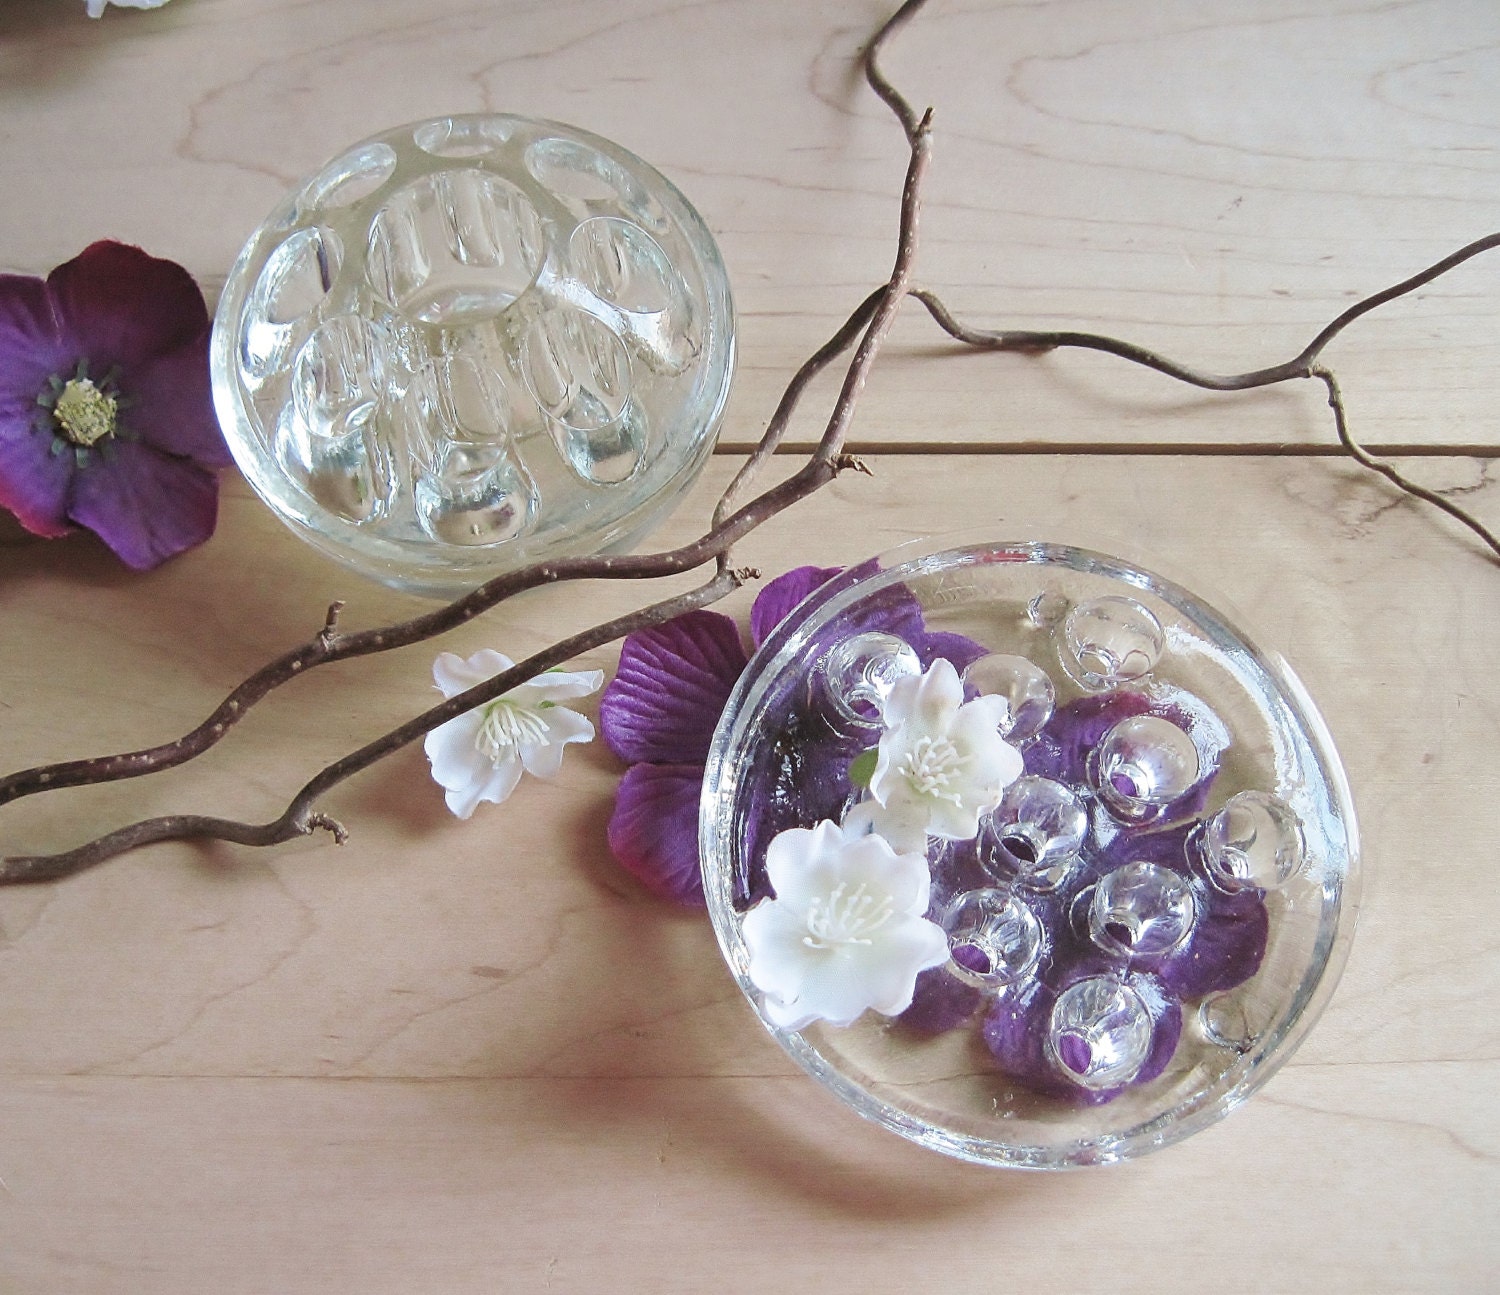 Vintage glass flower frogs ~ Floral/Garden Collectible~Sucker,Balloon, Fairy Wand,Pen Holders, Branch Display Paper Weight,Party Table DÃ©cor - FoxberryHill